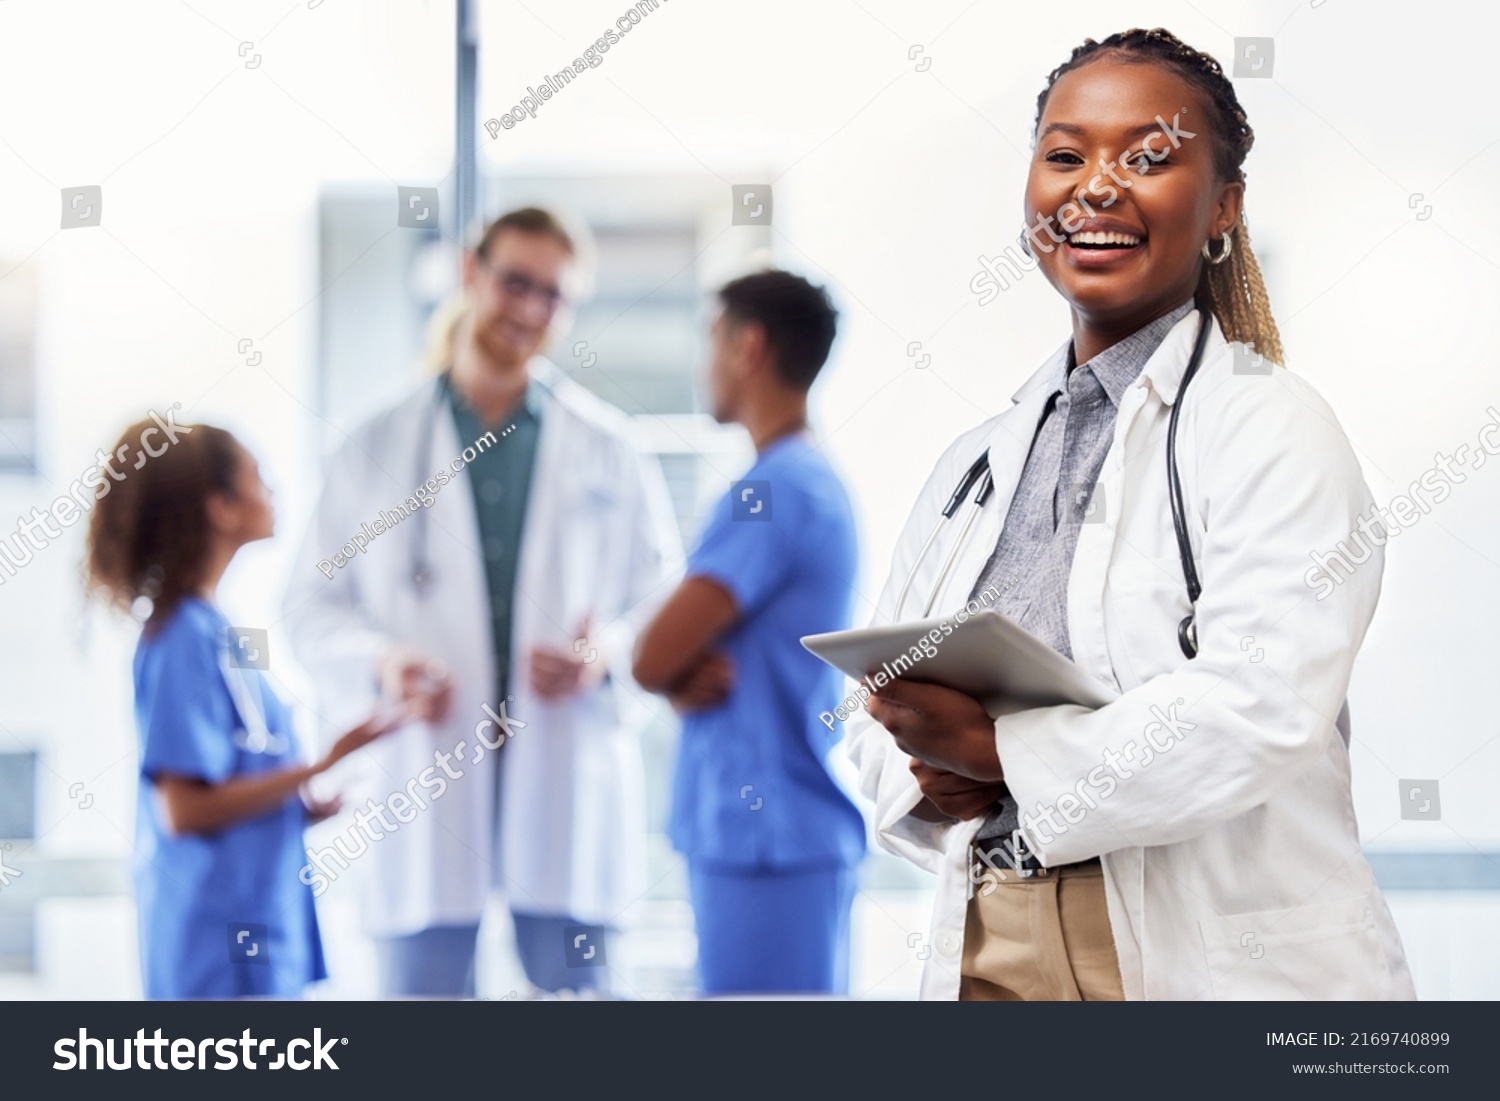 She was made for the medical field. Shot of a young female doctor using a digital tablet at work. #2169740899